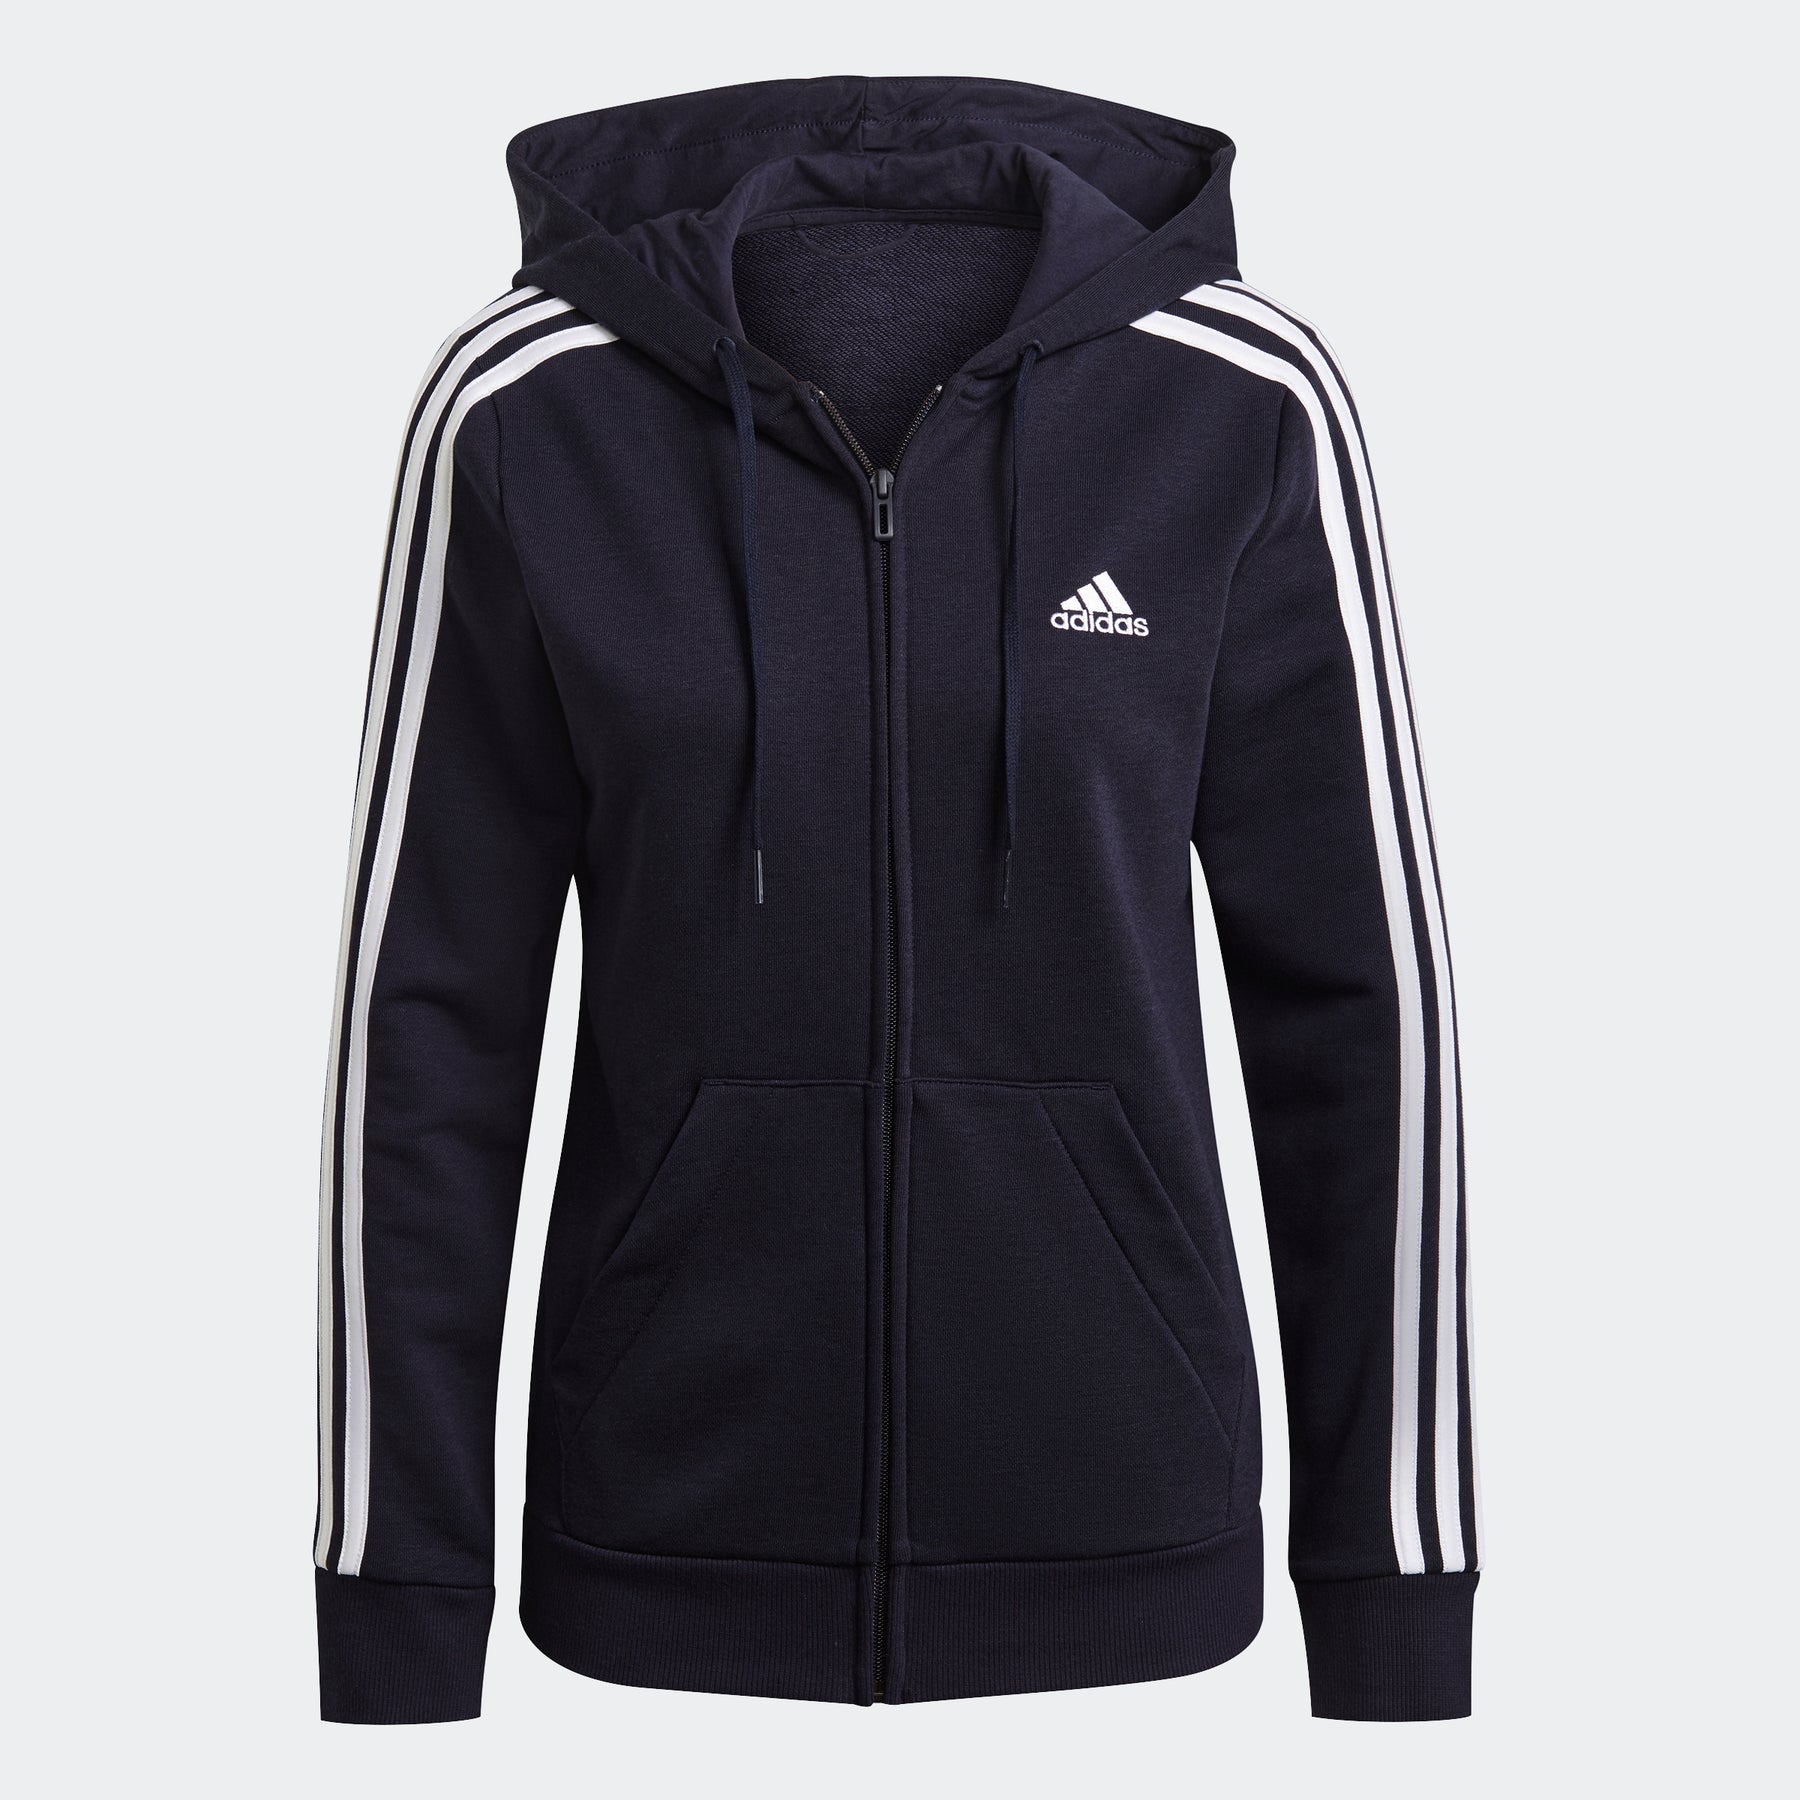 adidas Women's Essentials French Terry 3-Stripes Full-Zip Hoodie (Legend Ink) $22 + Free Shipping